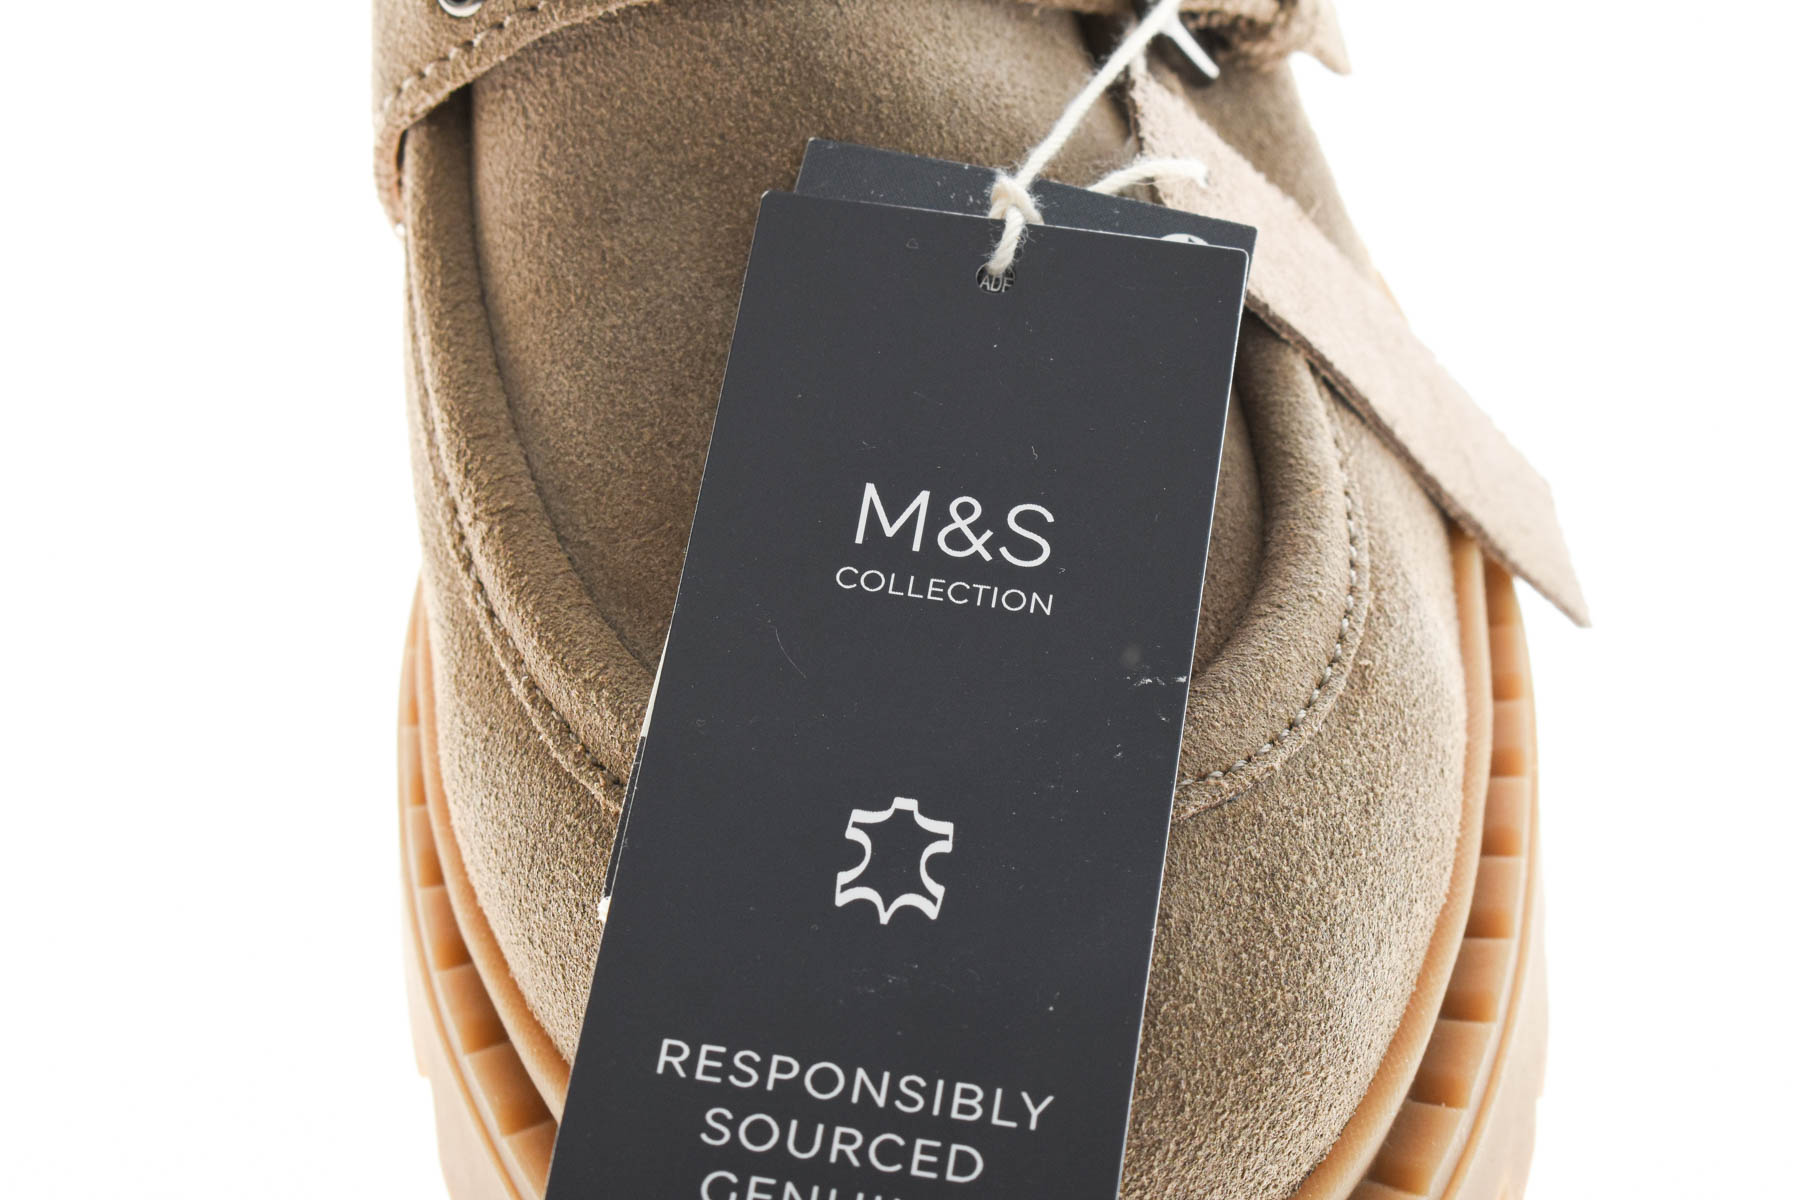 Buty damskie - M&S COLLECTION - 4